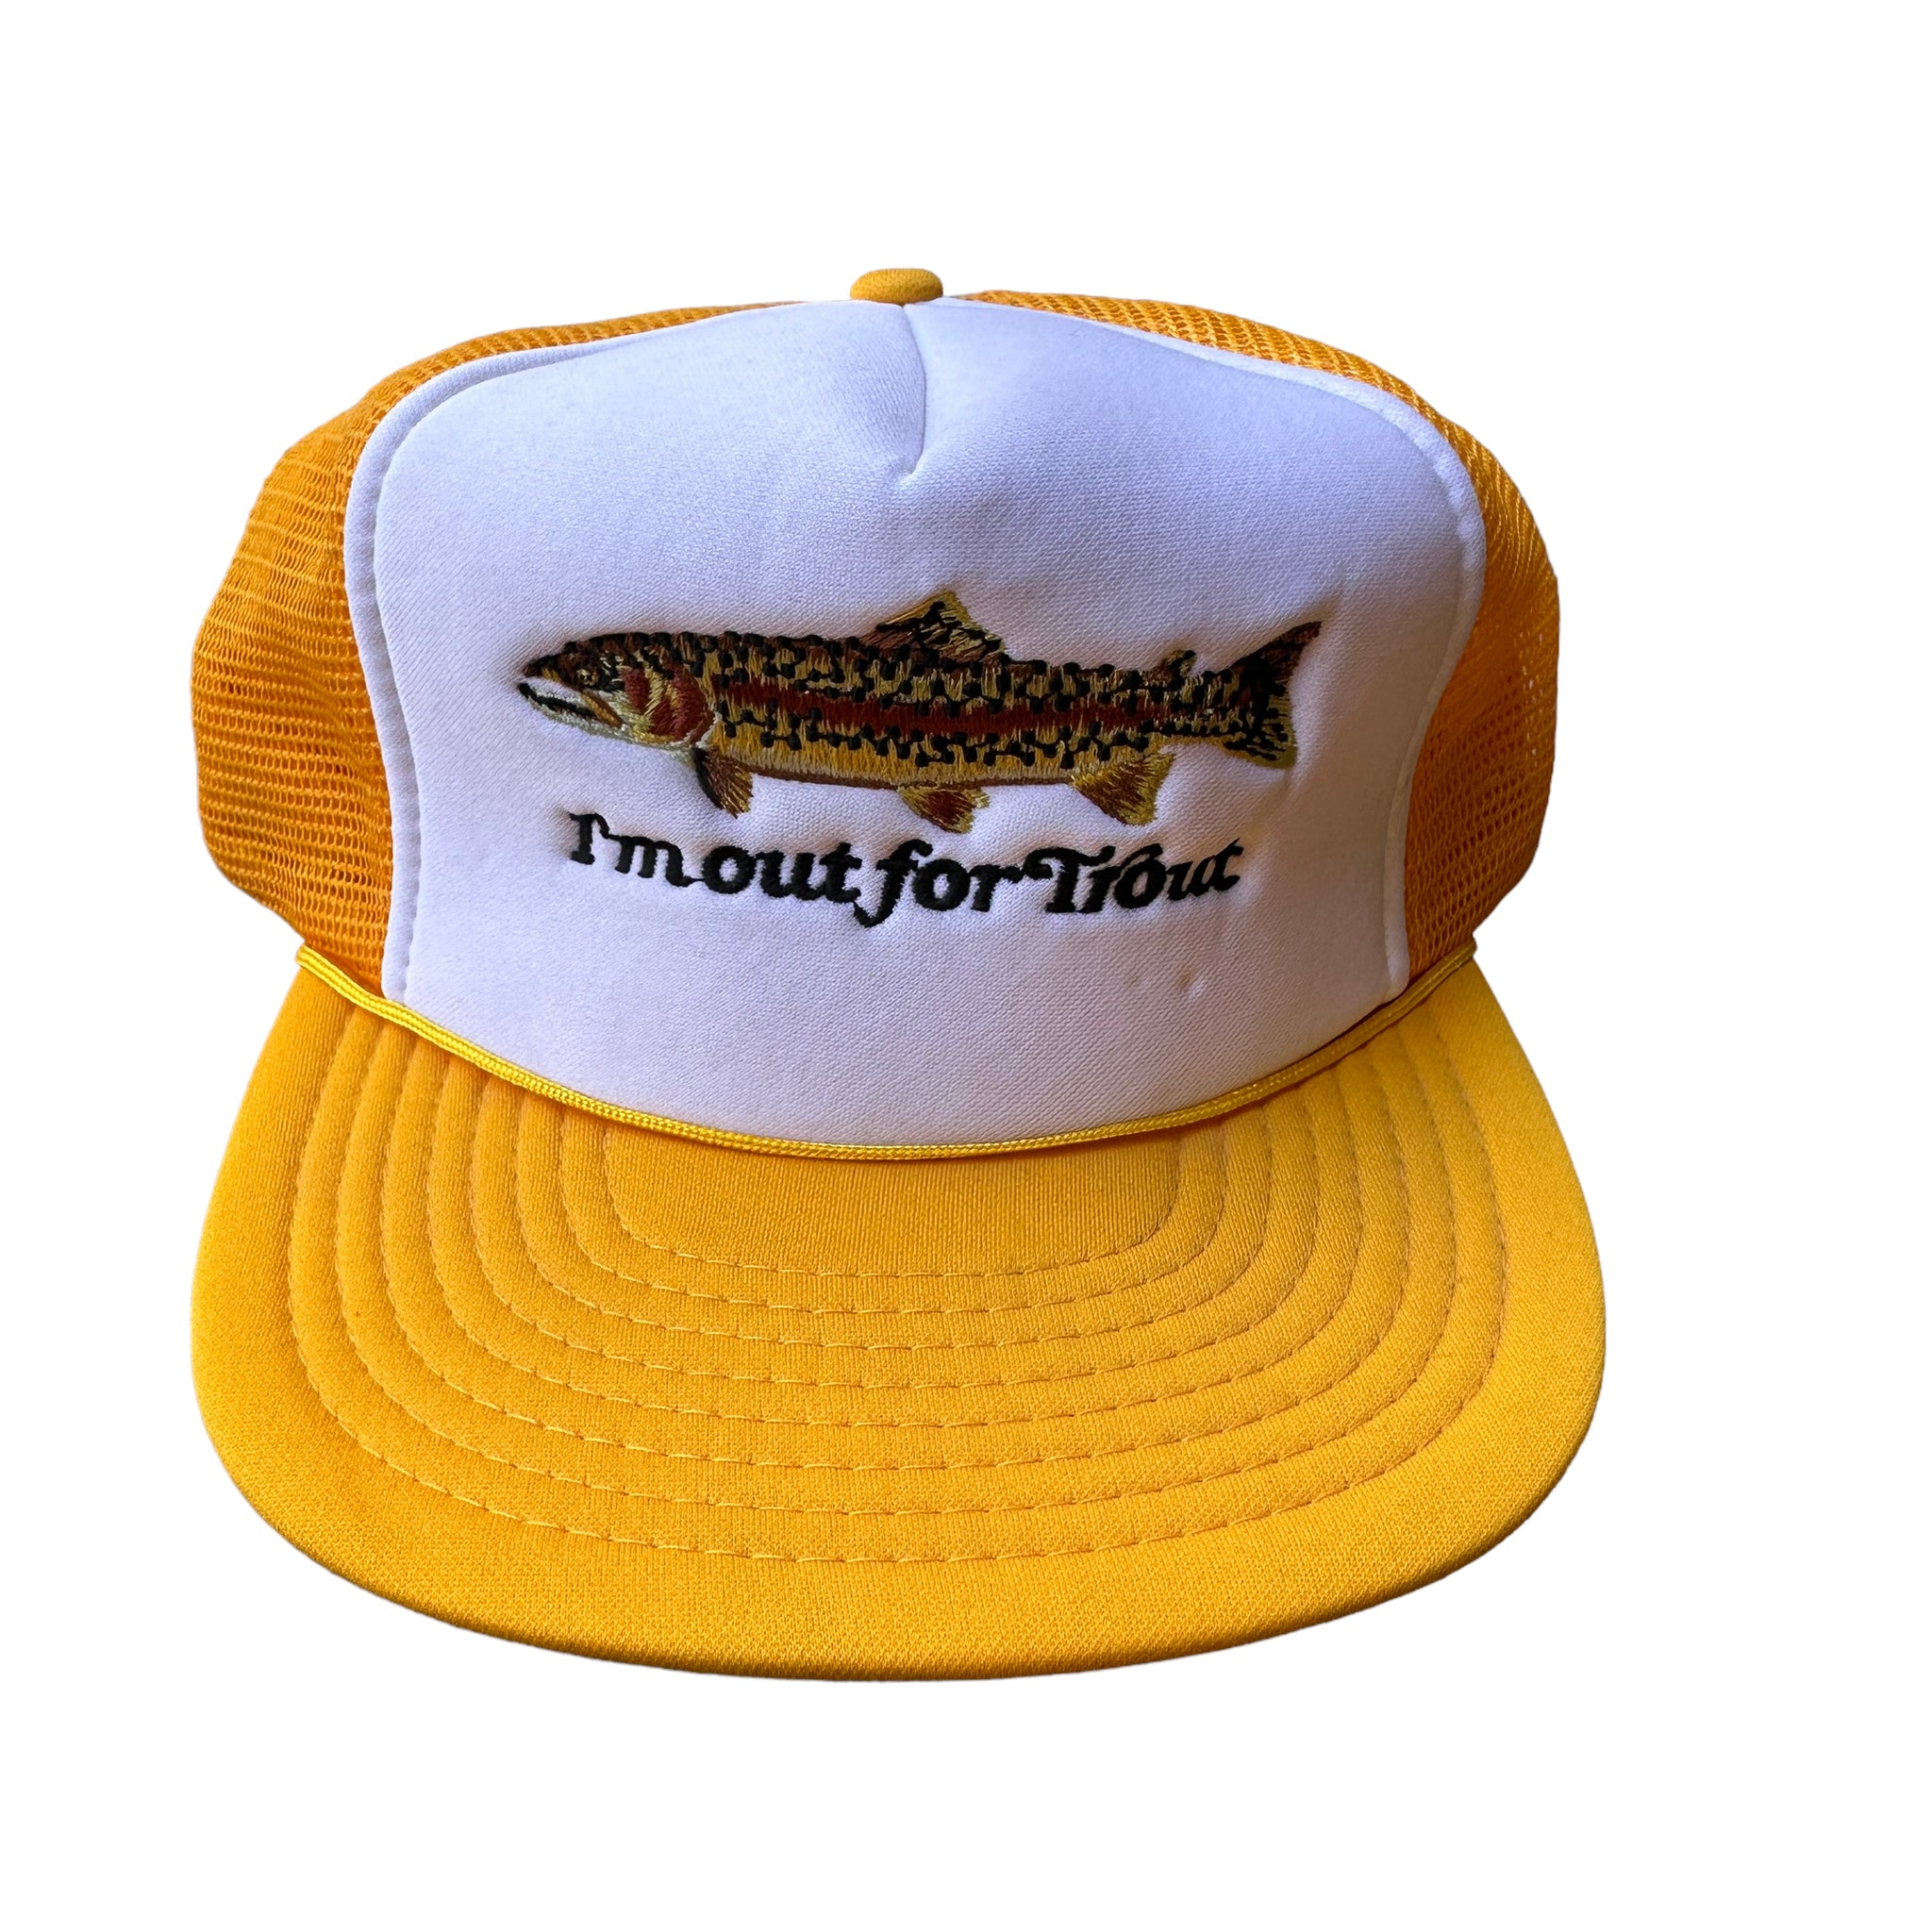 Brown trout i’m out for trout trucker hat